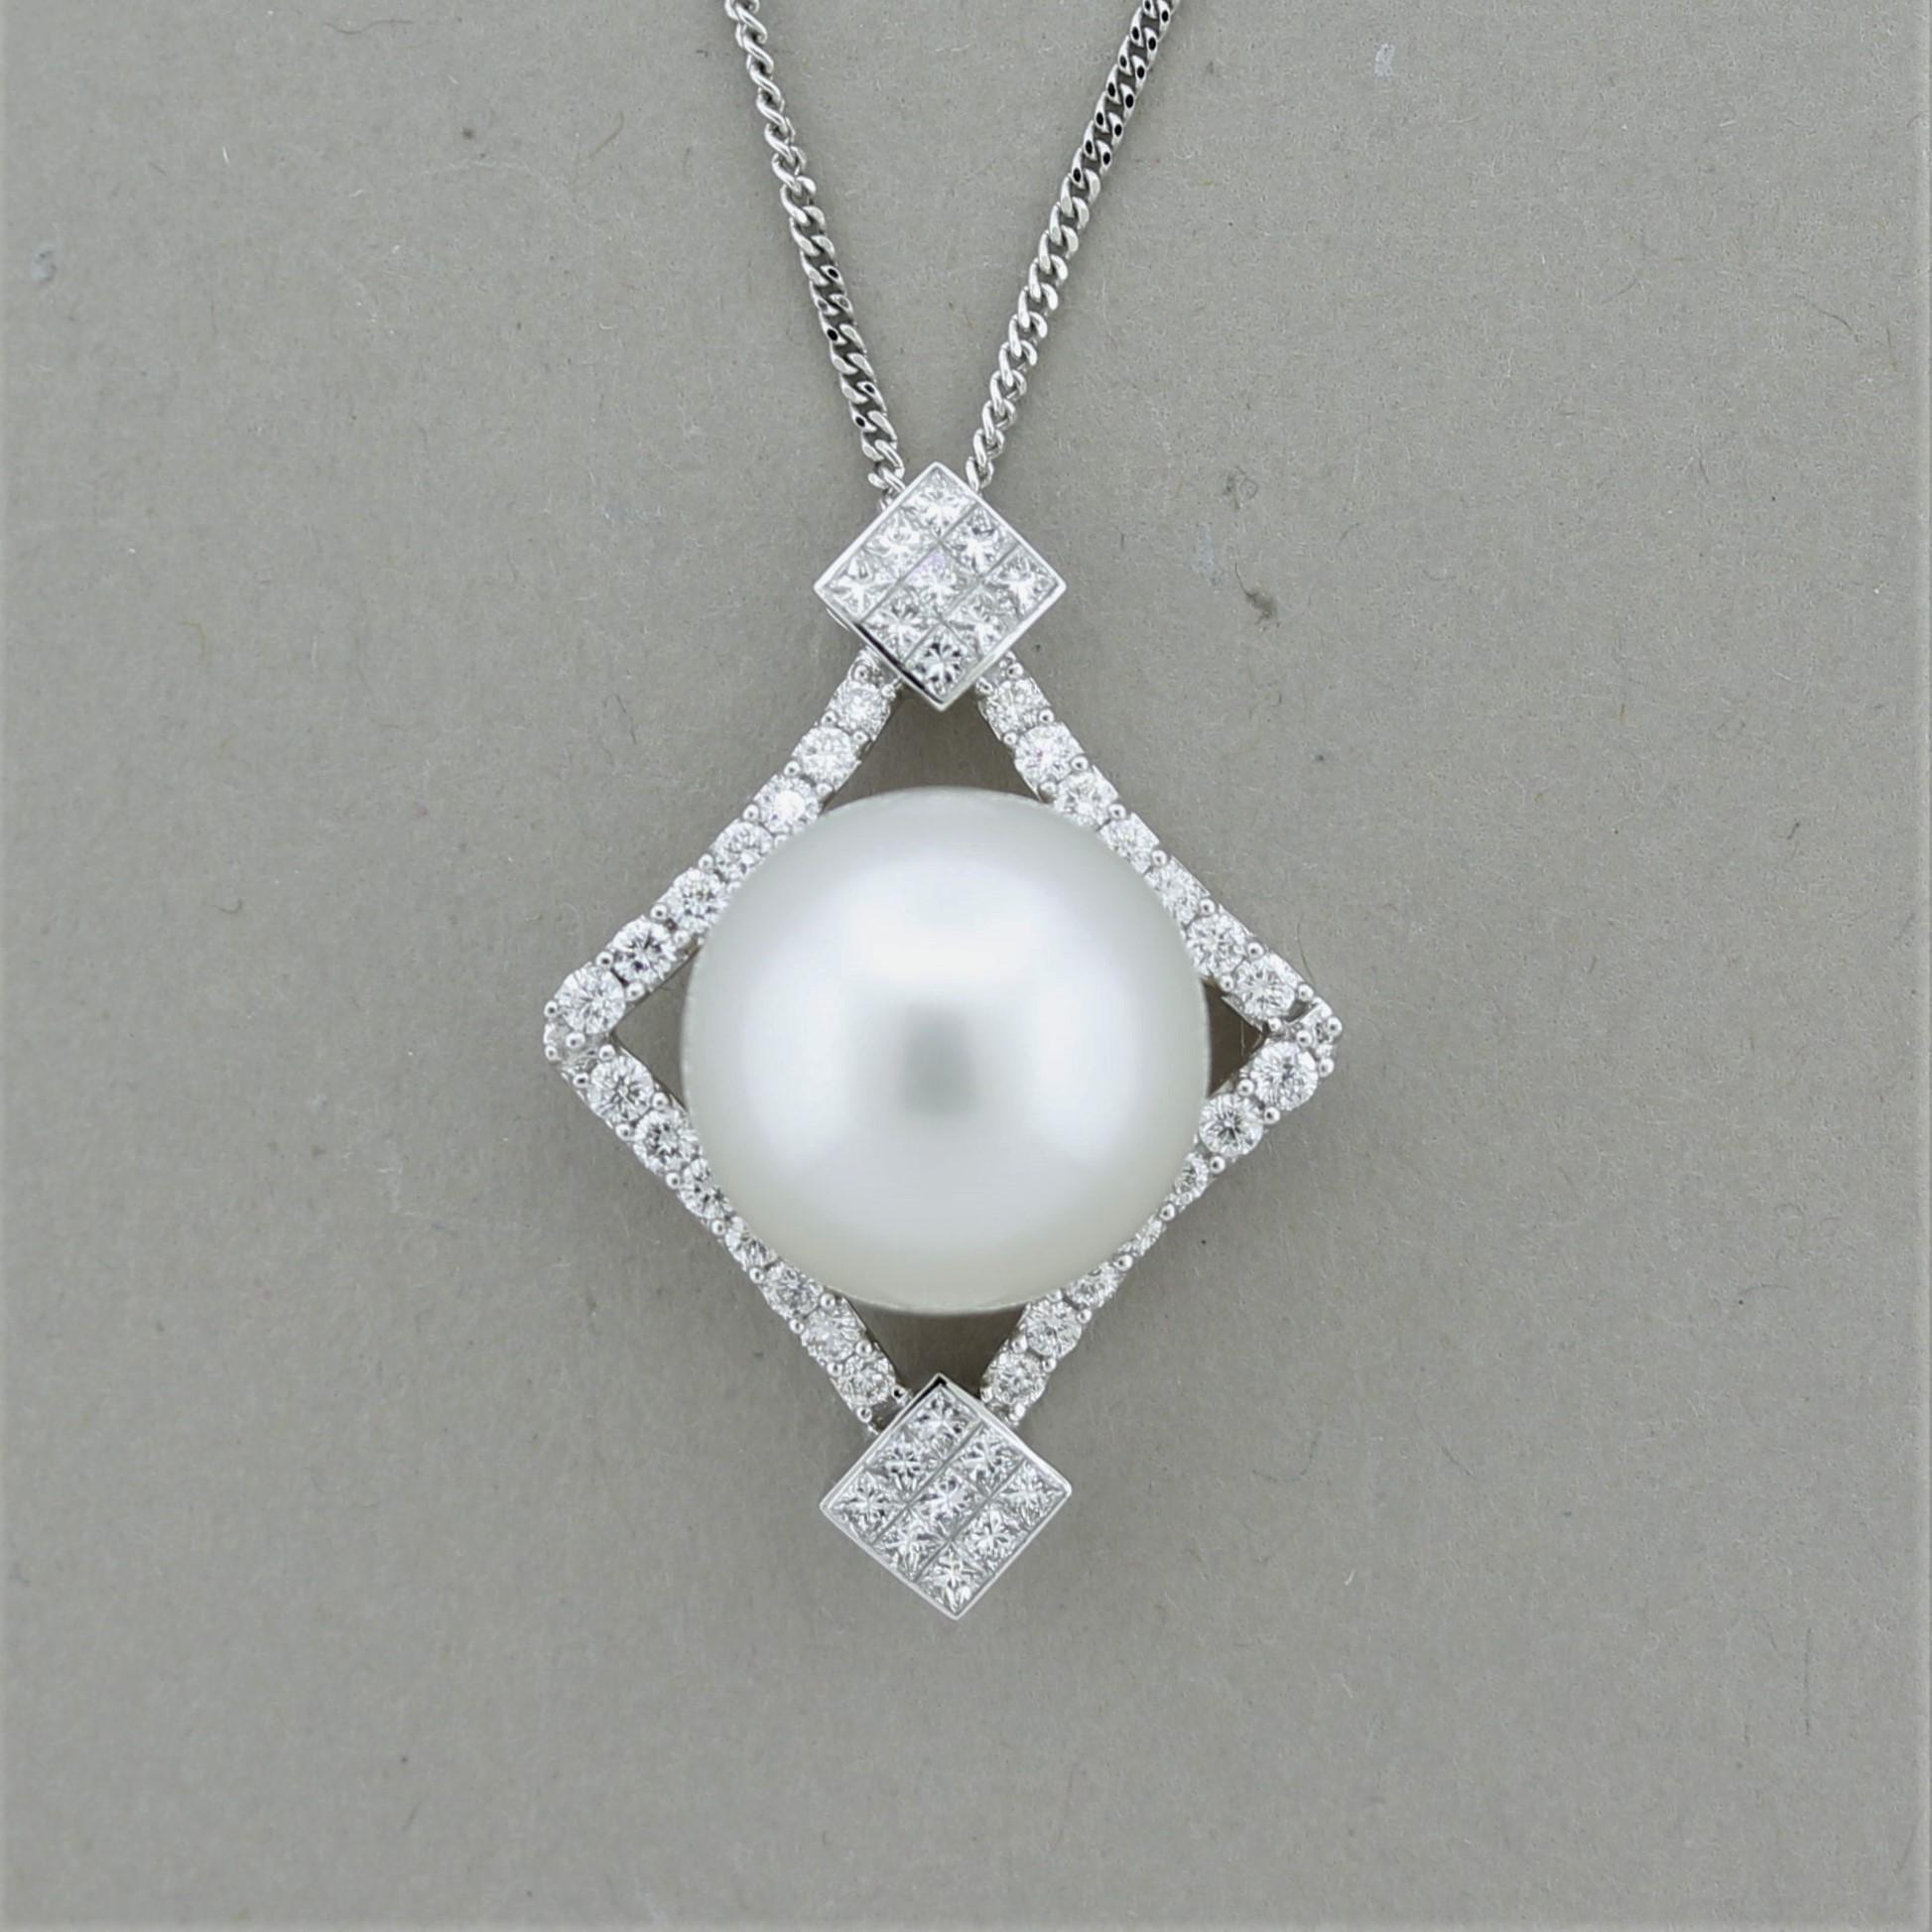 A lovely pendant featuring a fine top quality south sea pearl measuring 13.5mm. It has a bright white color with excellent luster and free of any major blemishes. It is accented by 0.74 carats of round brilliant-cut diamonds set on the gold frame